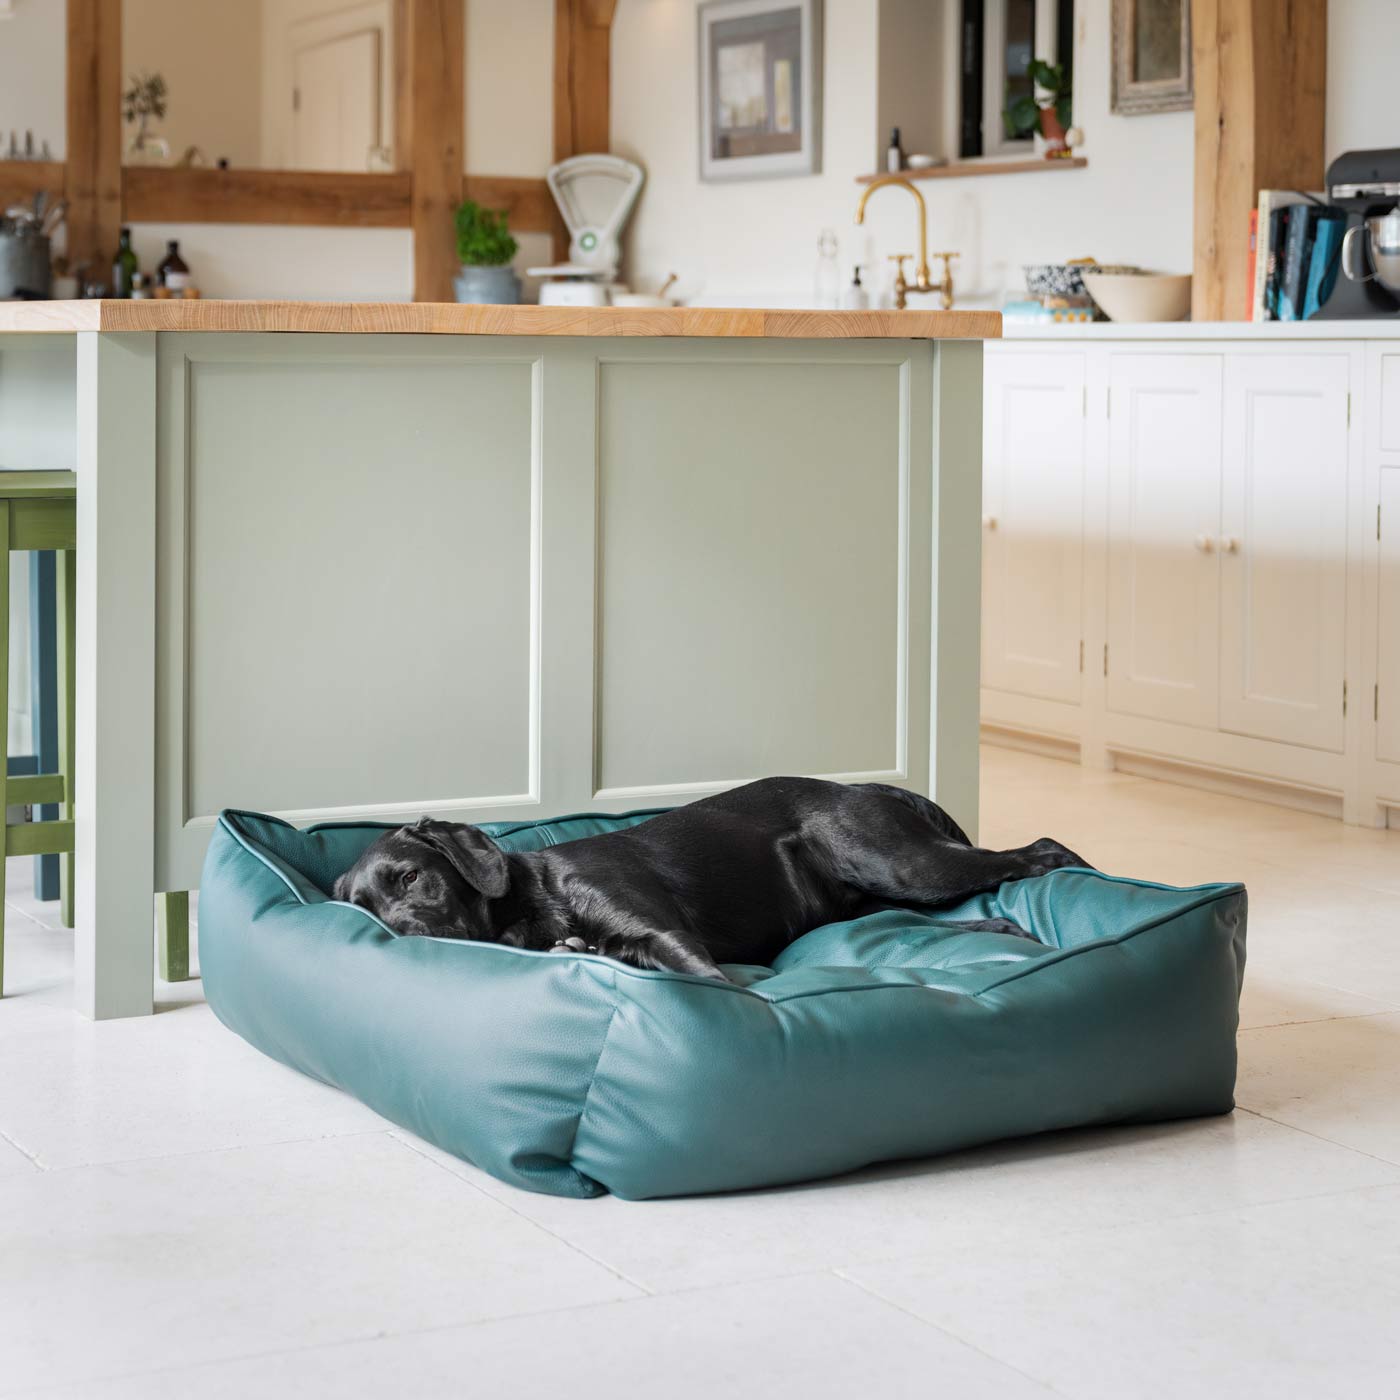 Luxury Handmade Box Bed in Rhino Tough Jungle Faux Leather, in Forest Green, Perfect For Your Pets Nap Time! Available To Personalize at Lords & Labradors US